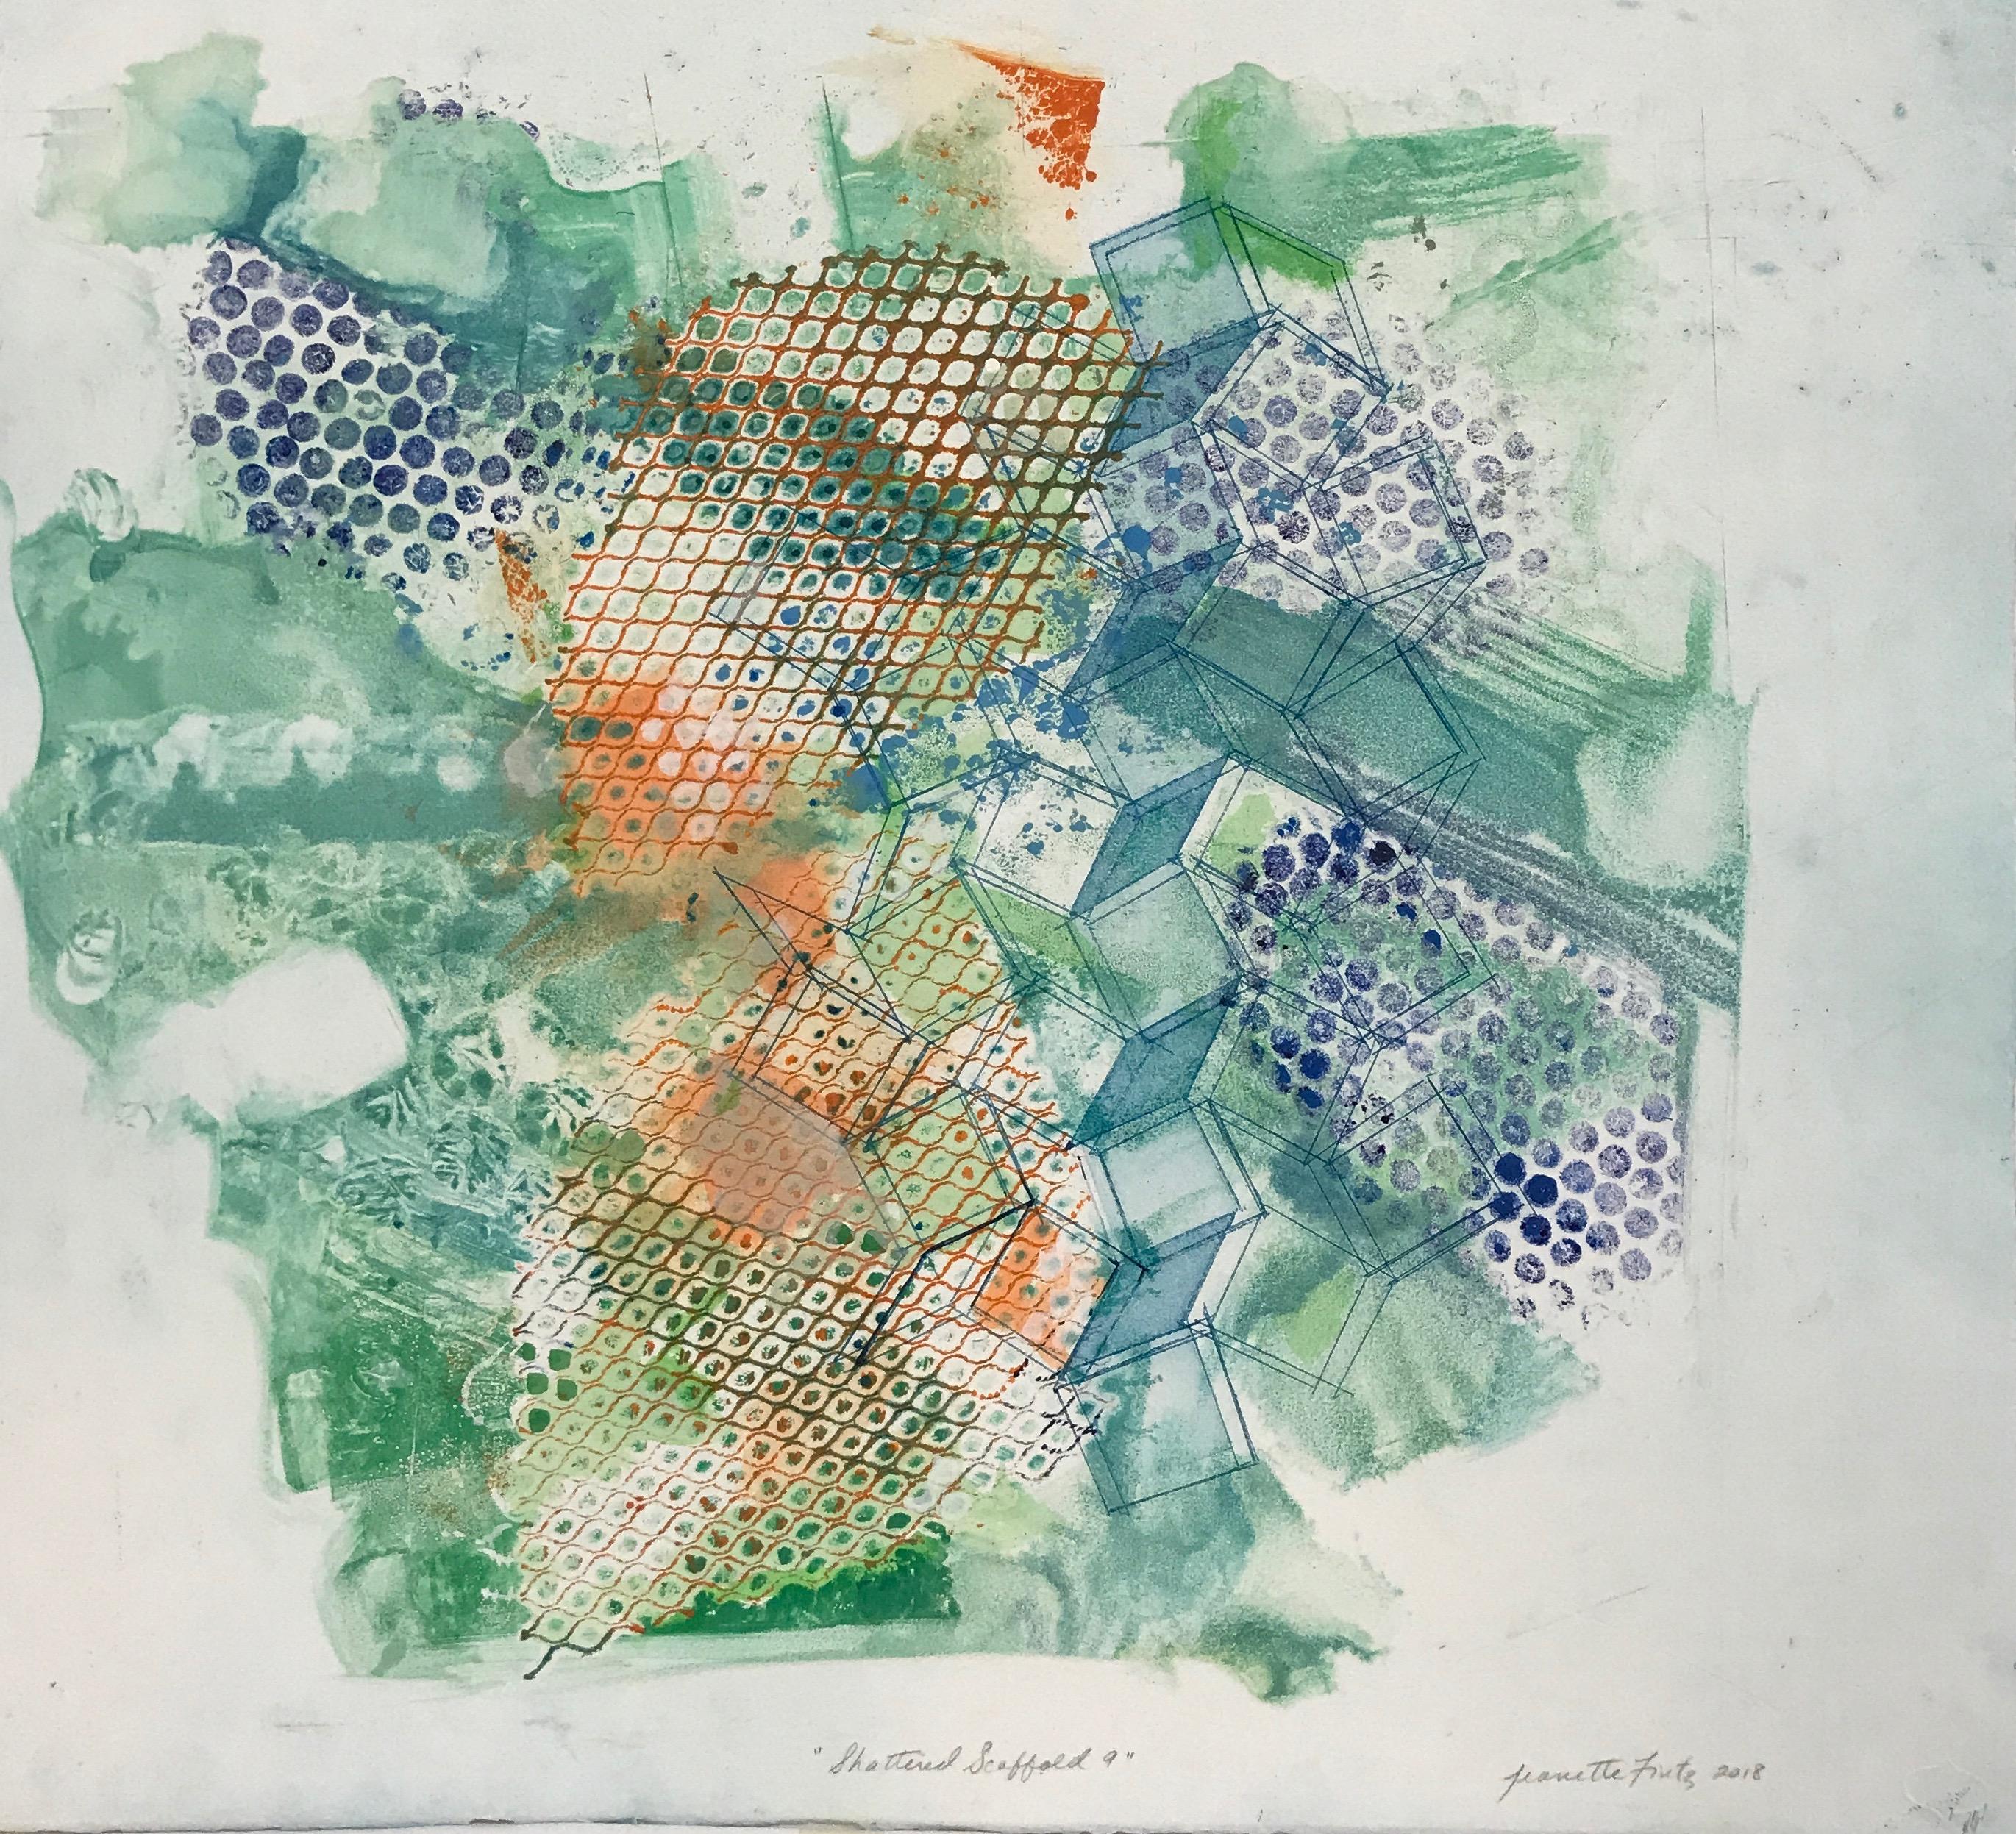 Jeanette Fintz Abstract Print - "Shattered Scaffold 9", gestural abstract etched monoprint, blue, green, orange.